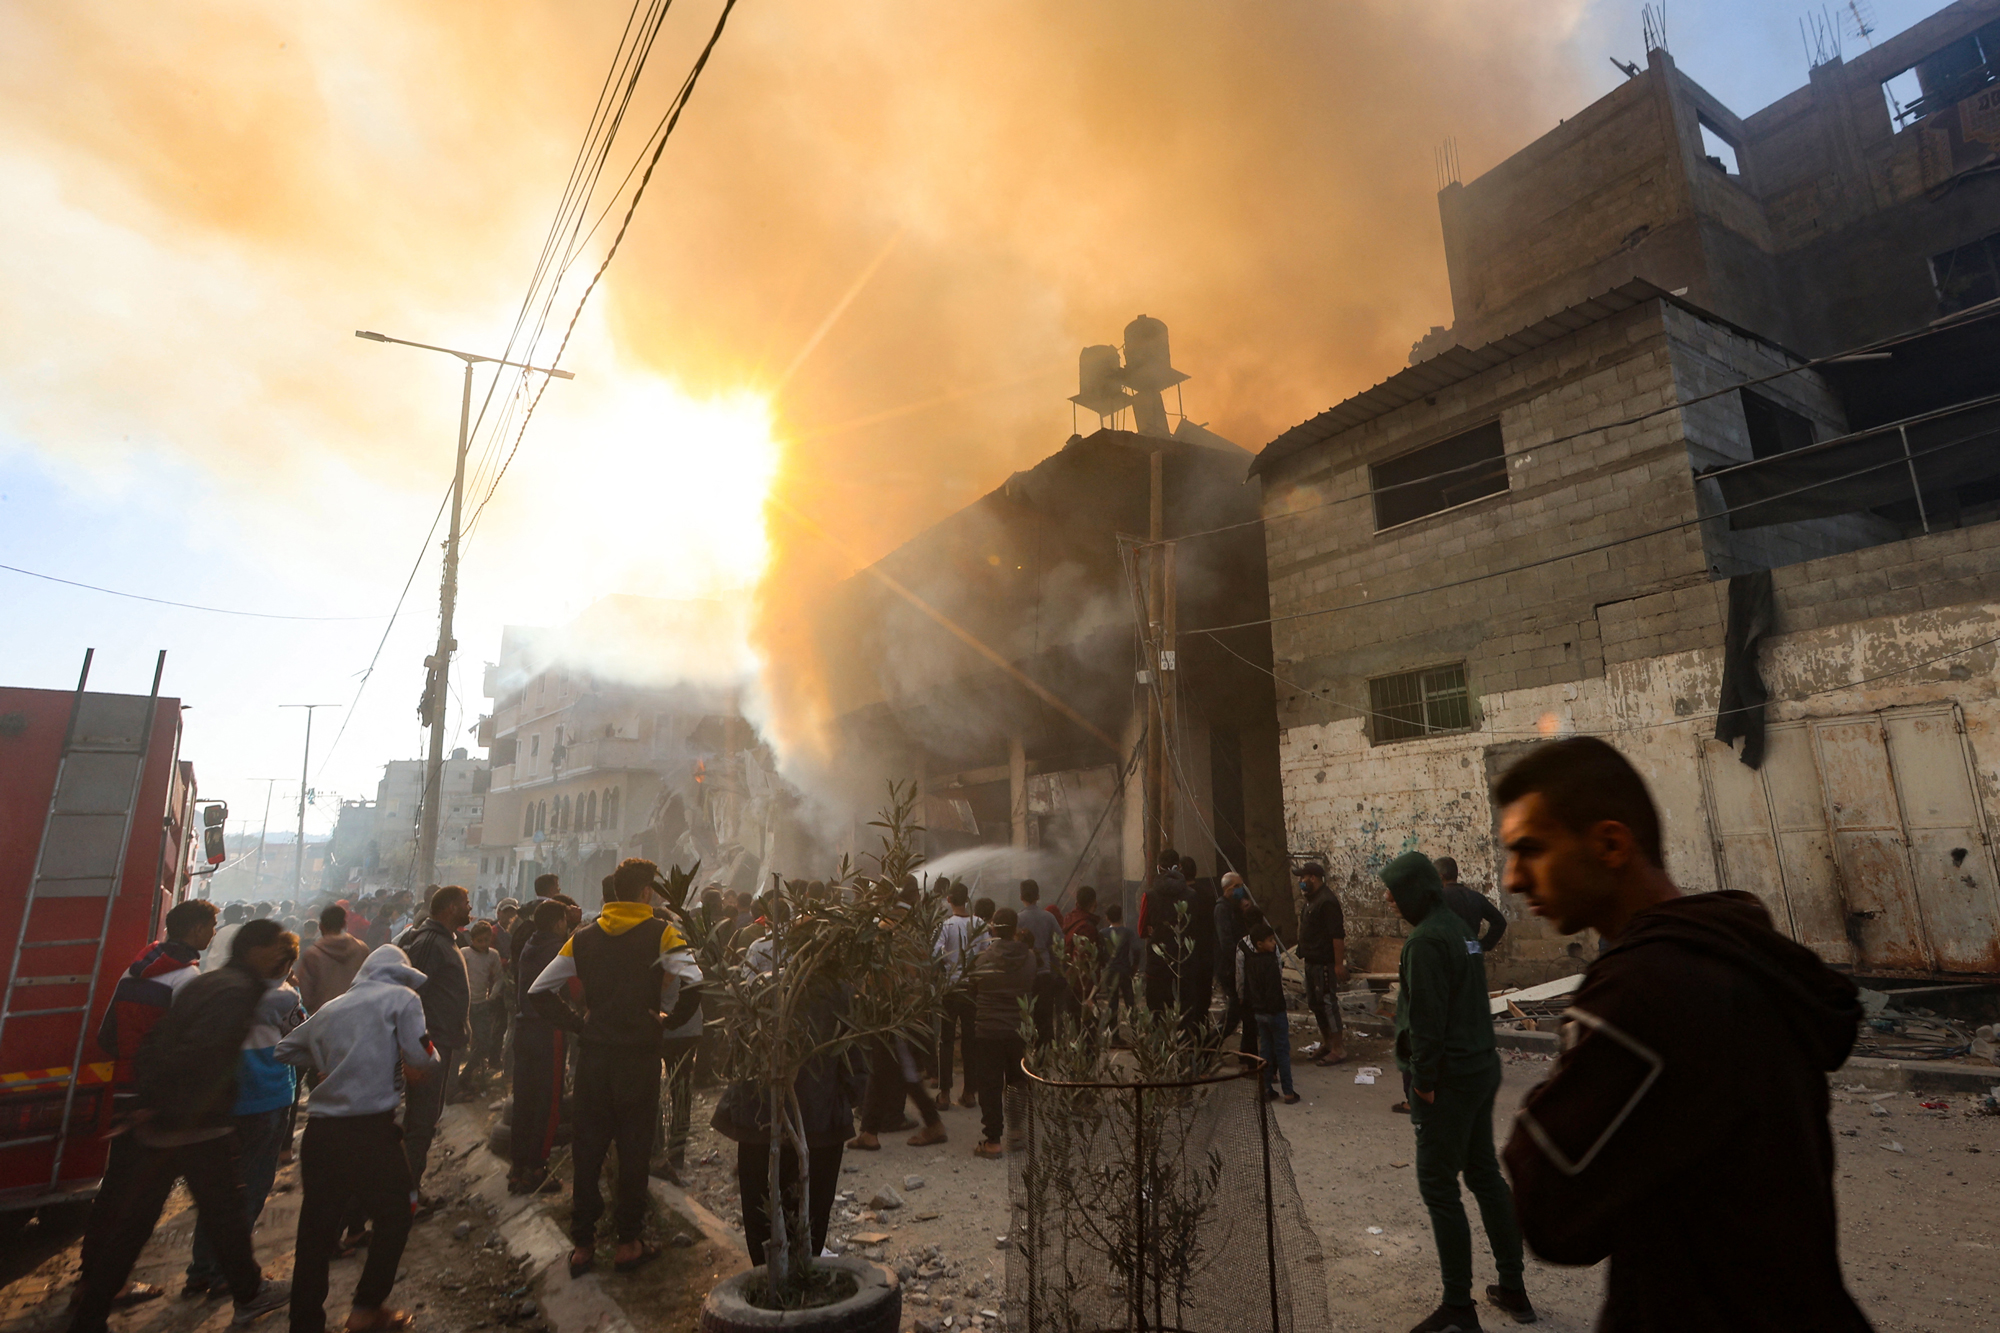 People gather in front of a burning building after it was hit by an Israeli strike in Khan Younis, southern Gaza, on December 9.